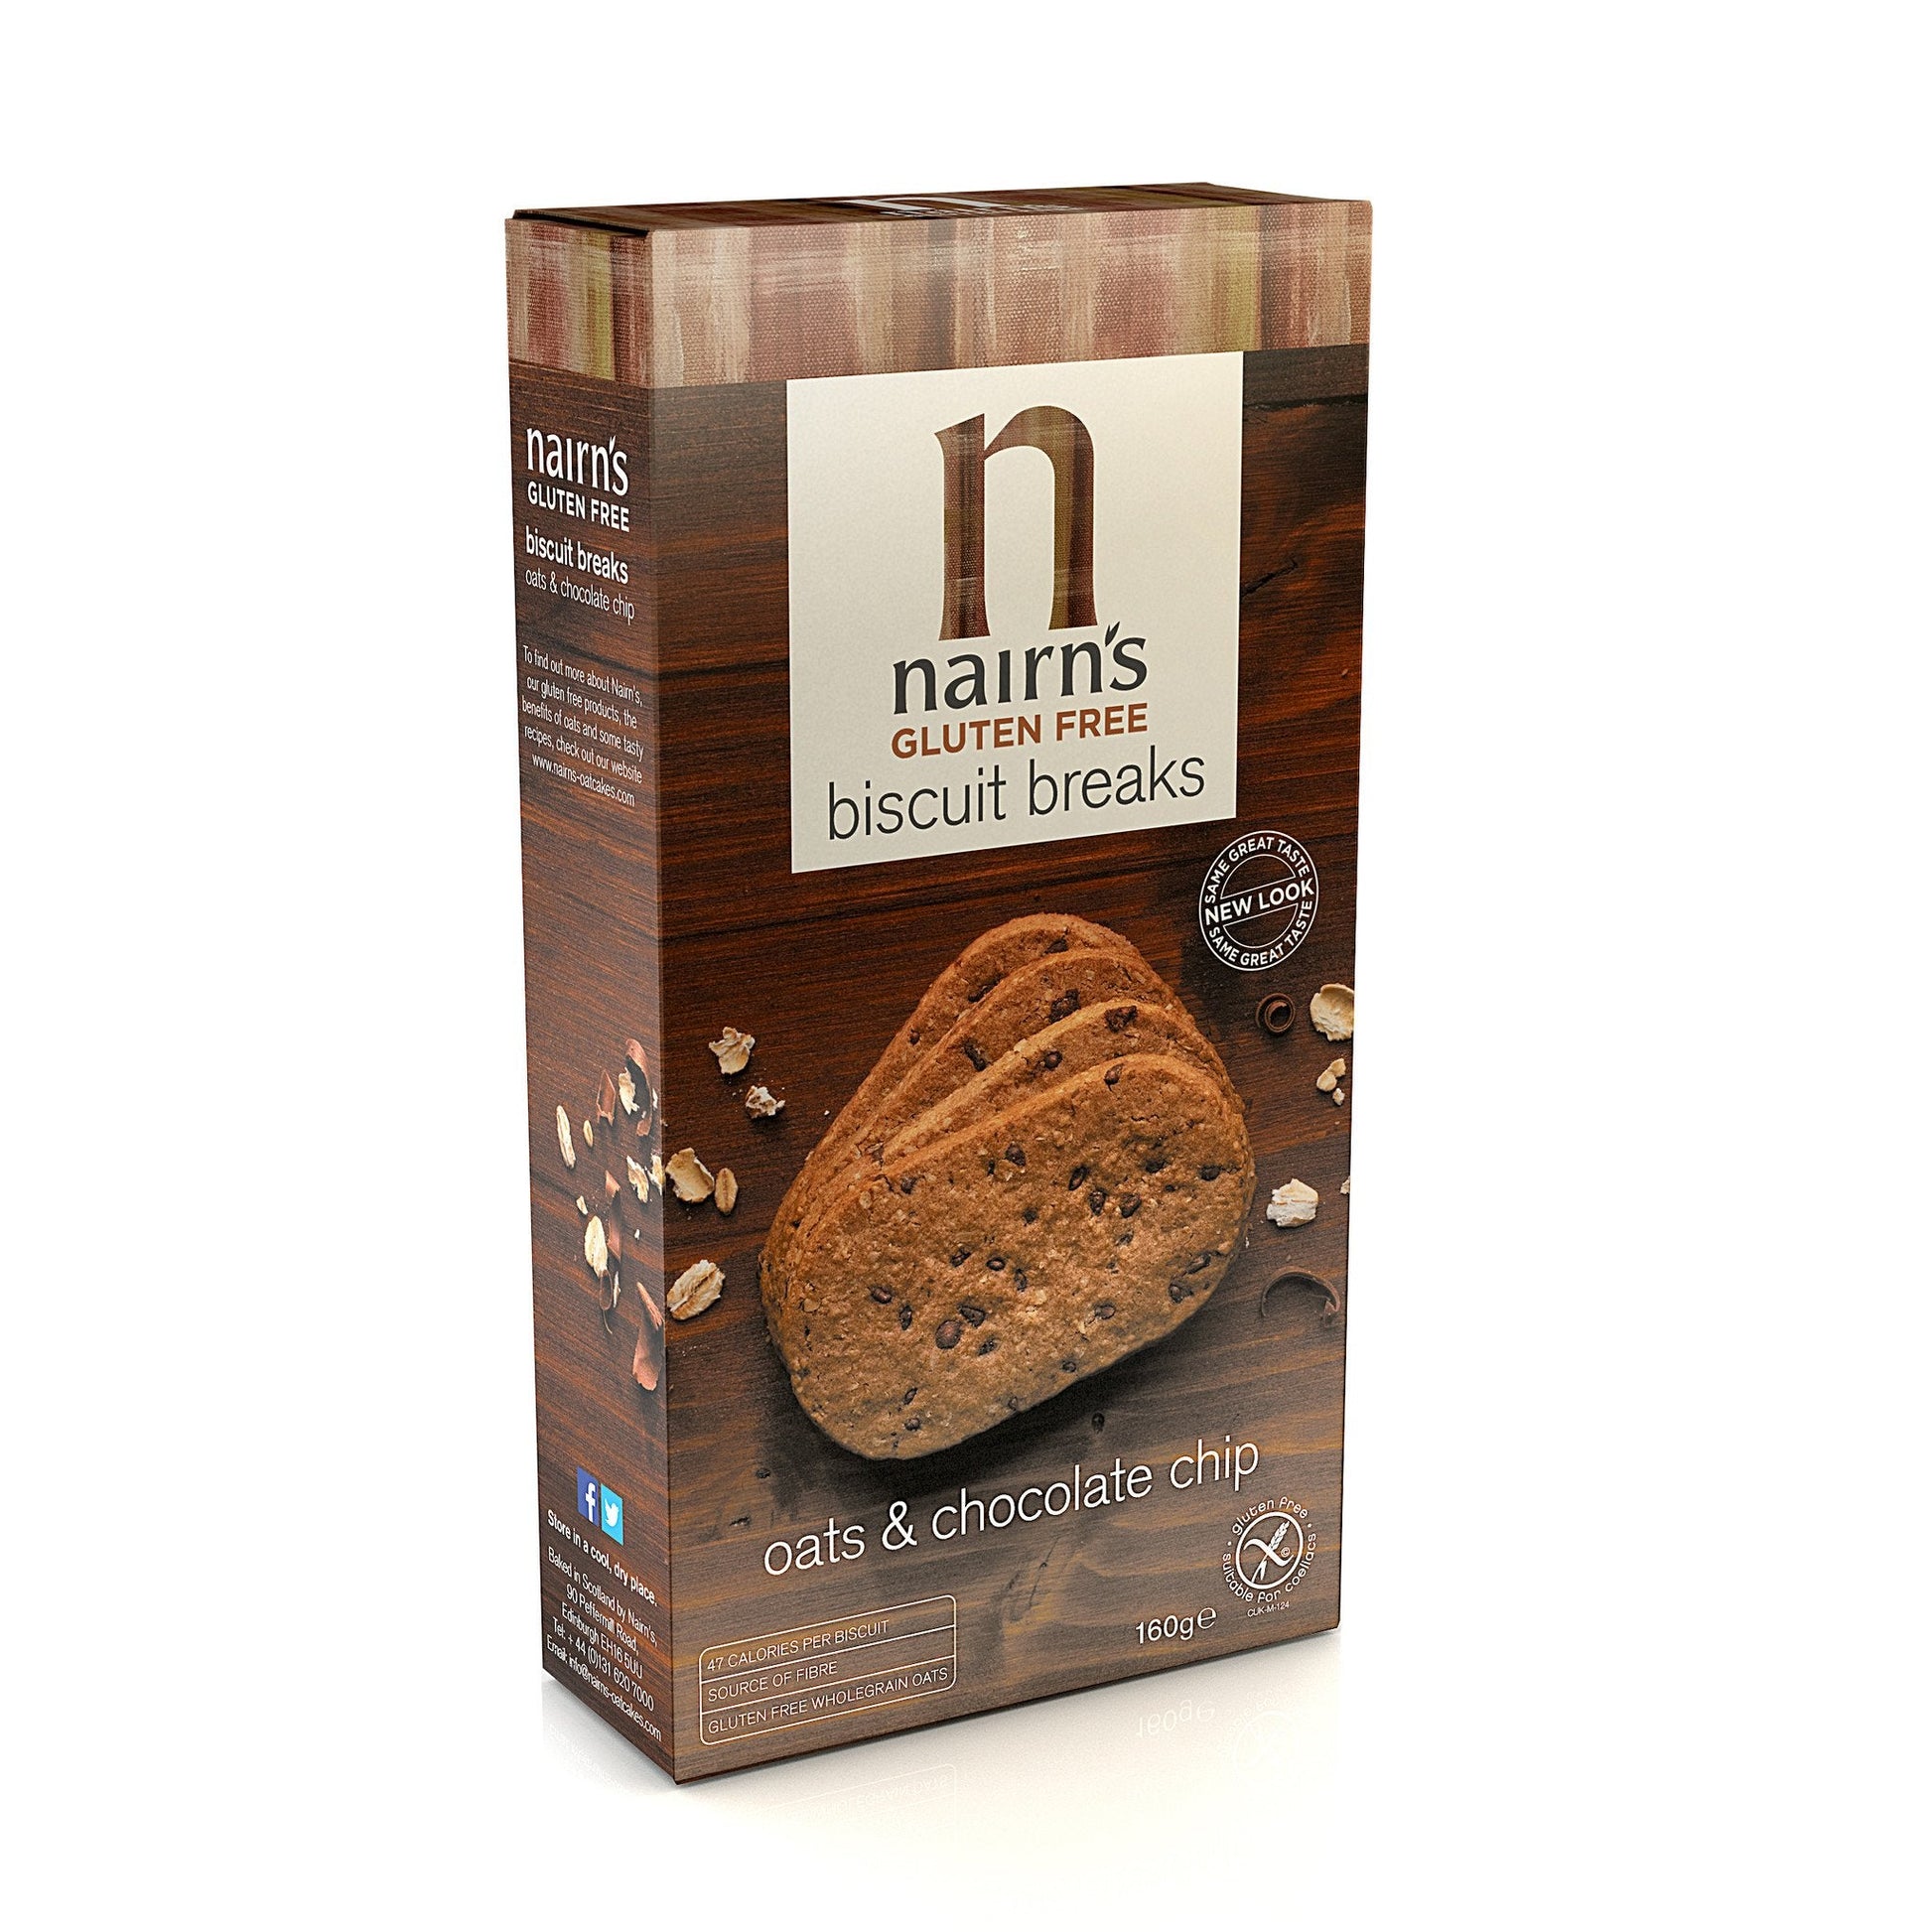 Nairns Gluten Free Chocolate Chip Biscuit Breaks, 160g - Just Natural